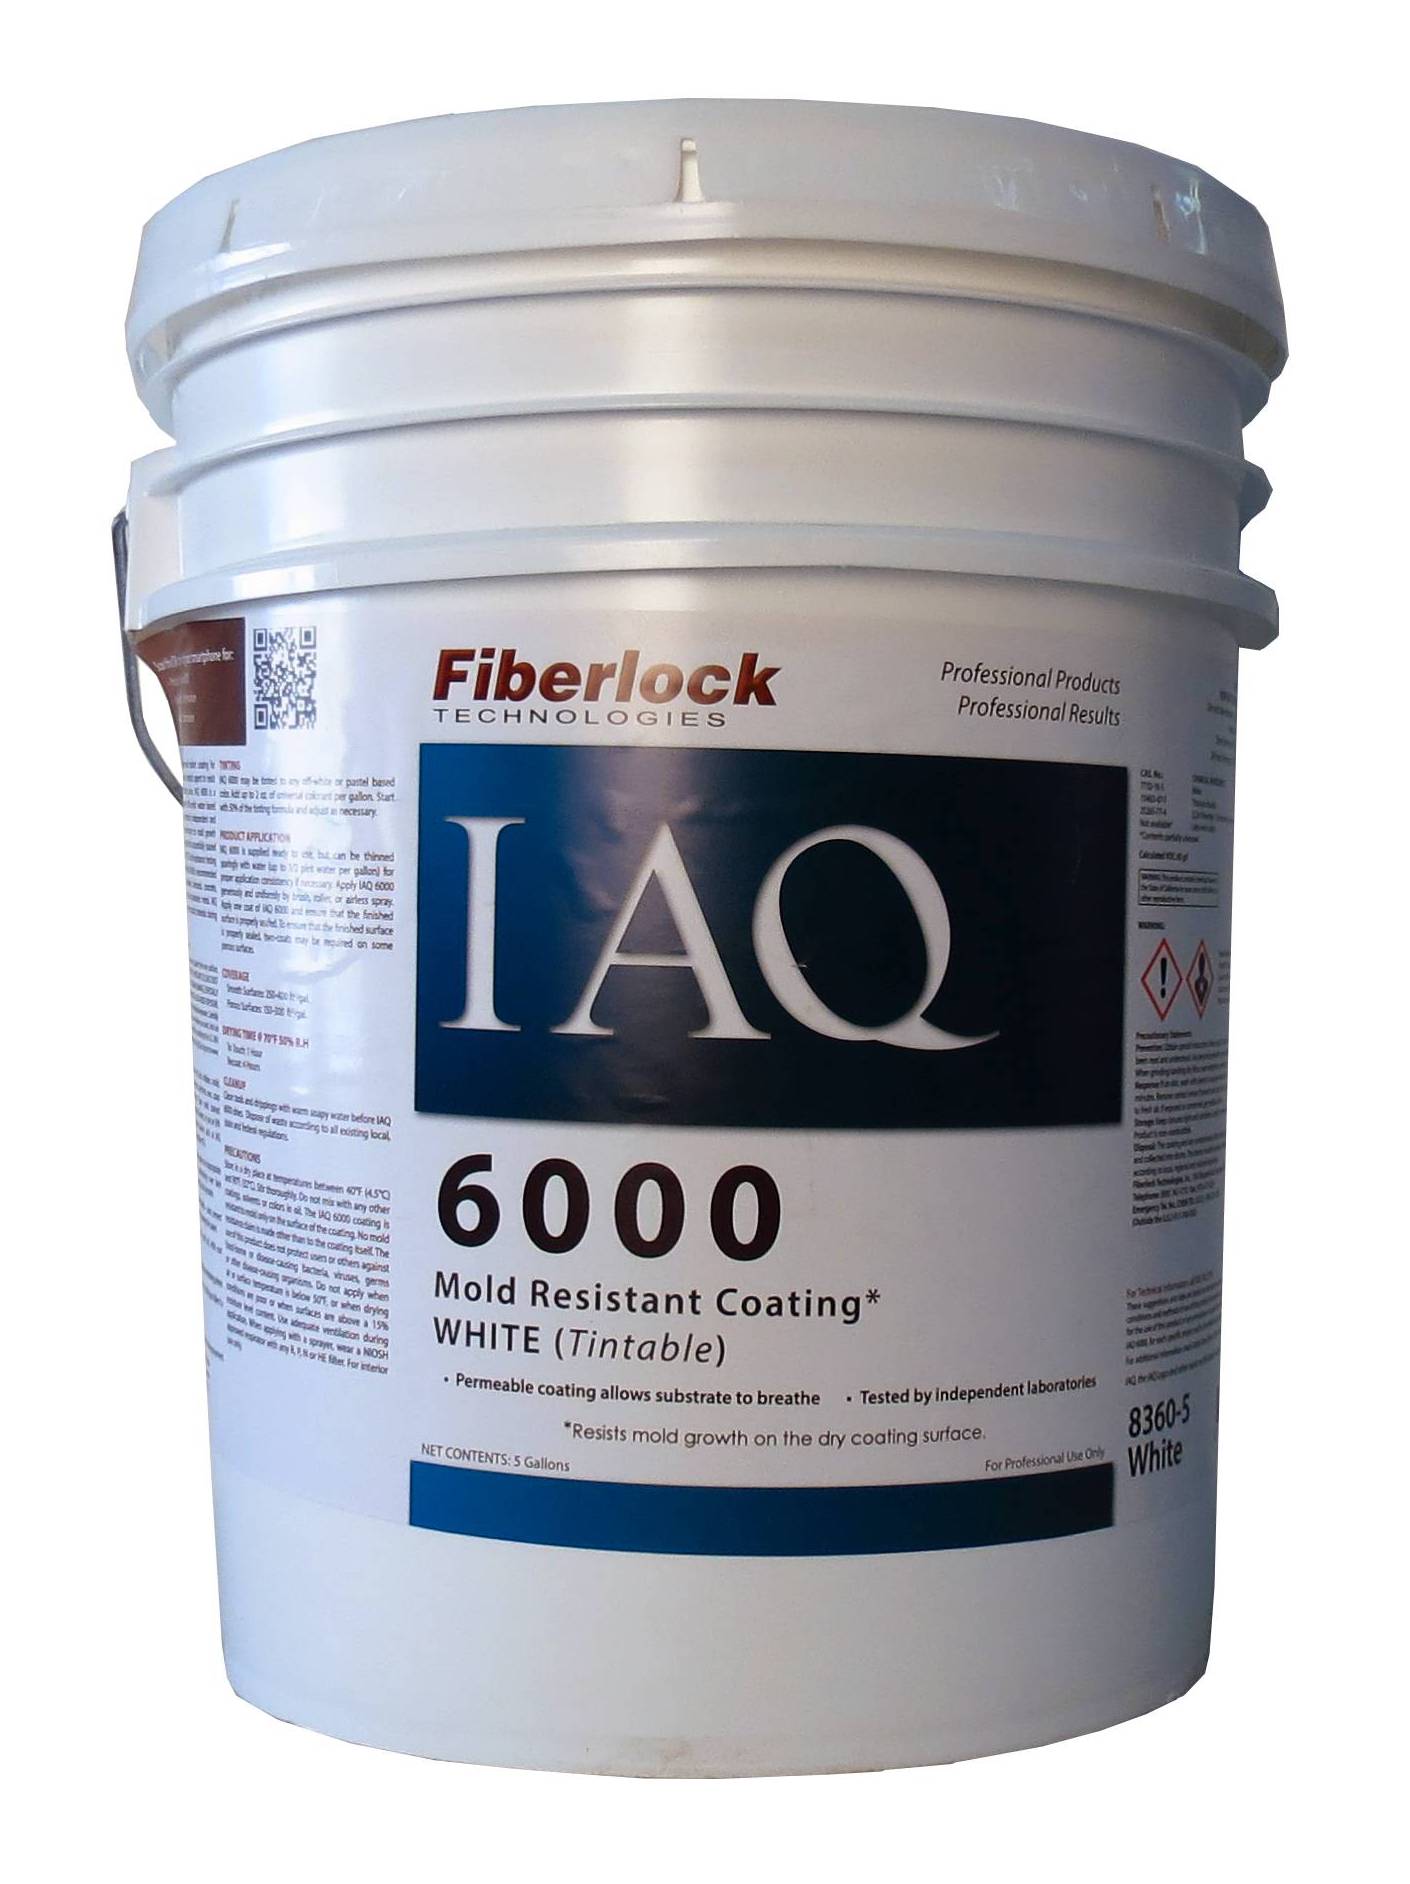 iaq-6000-mold-resistant-coating-based-on-titanium-dioxide-heavy-duty-alcohol-to-prevent-mold-growth-5-gal-us-containers.jpg